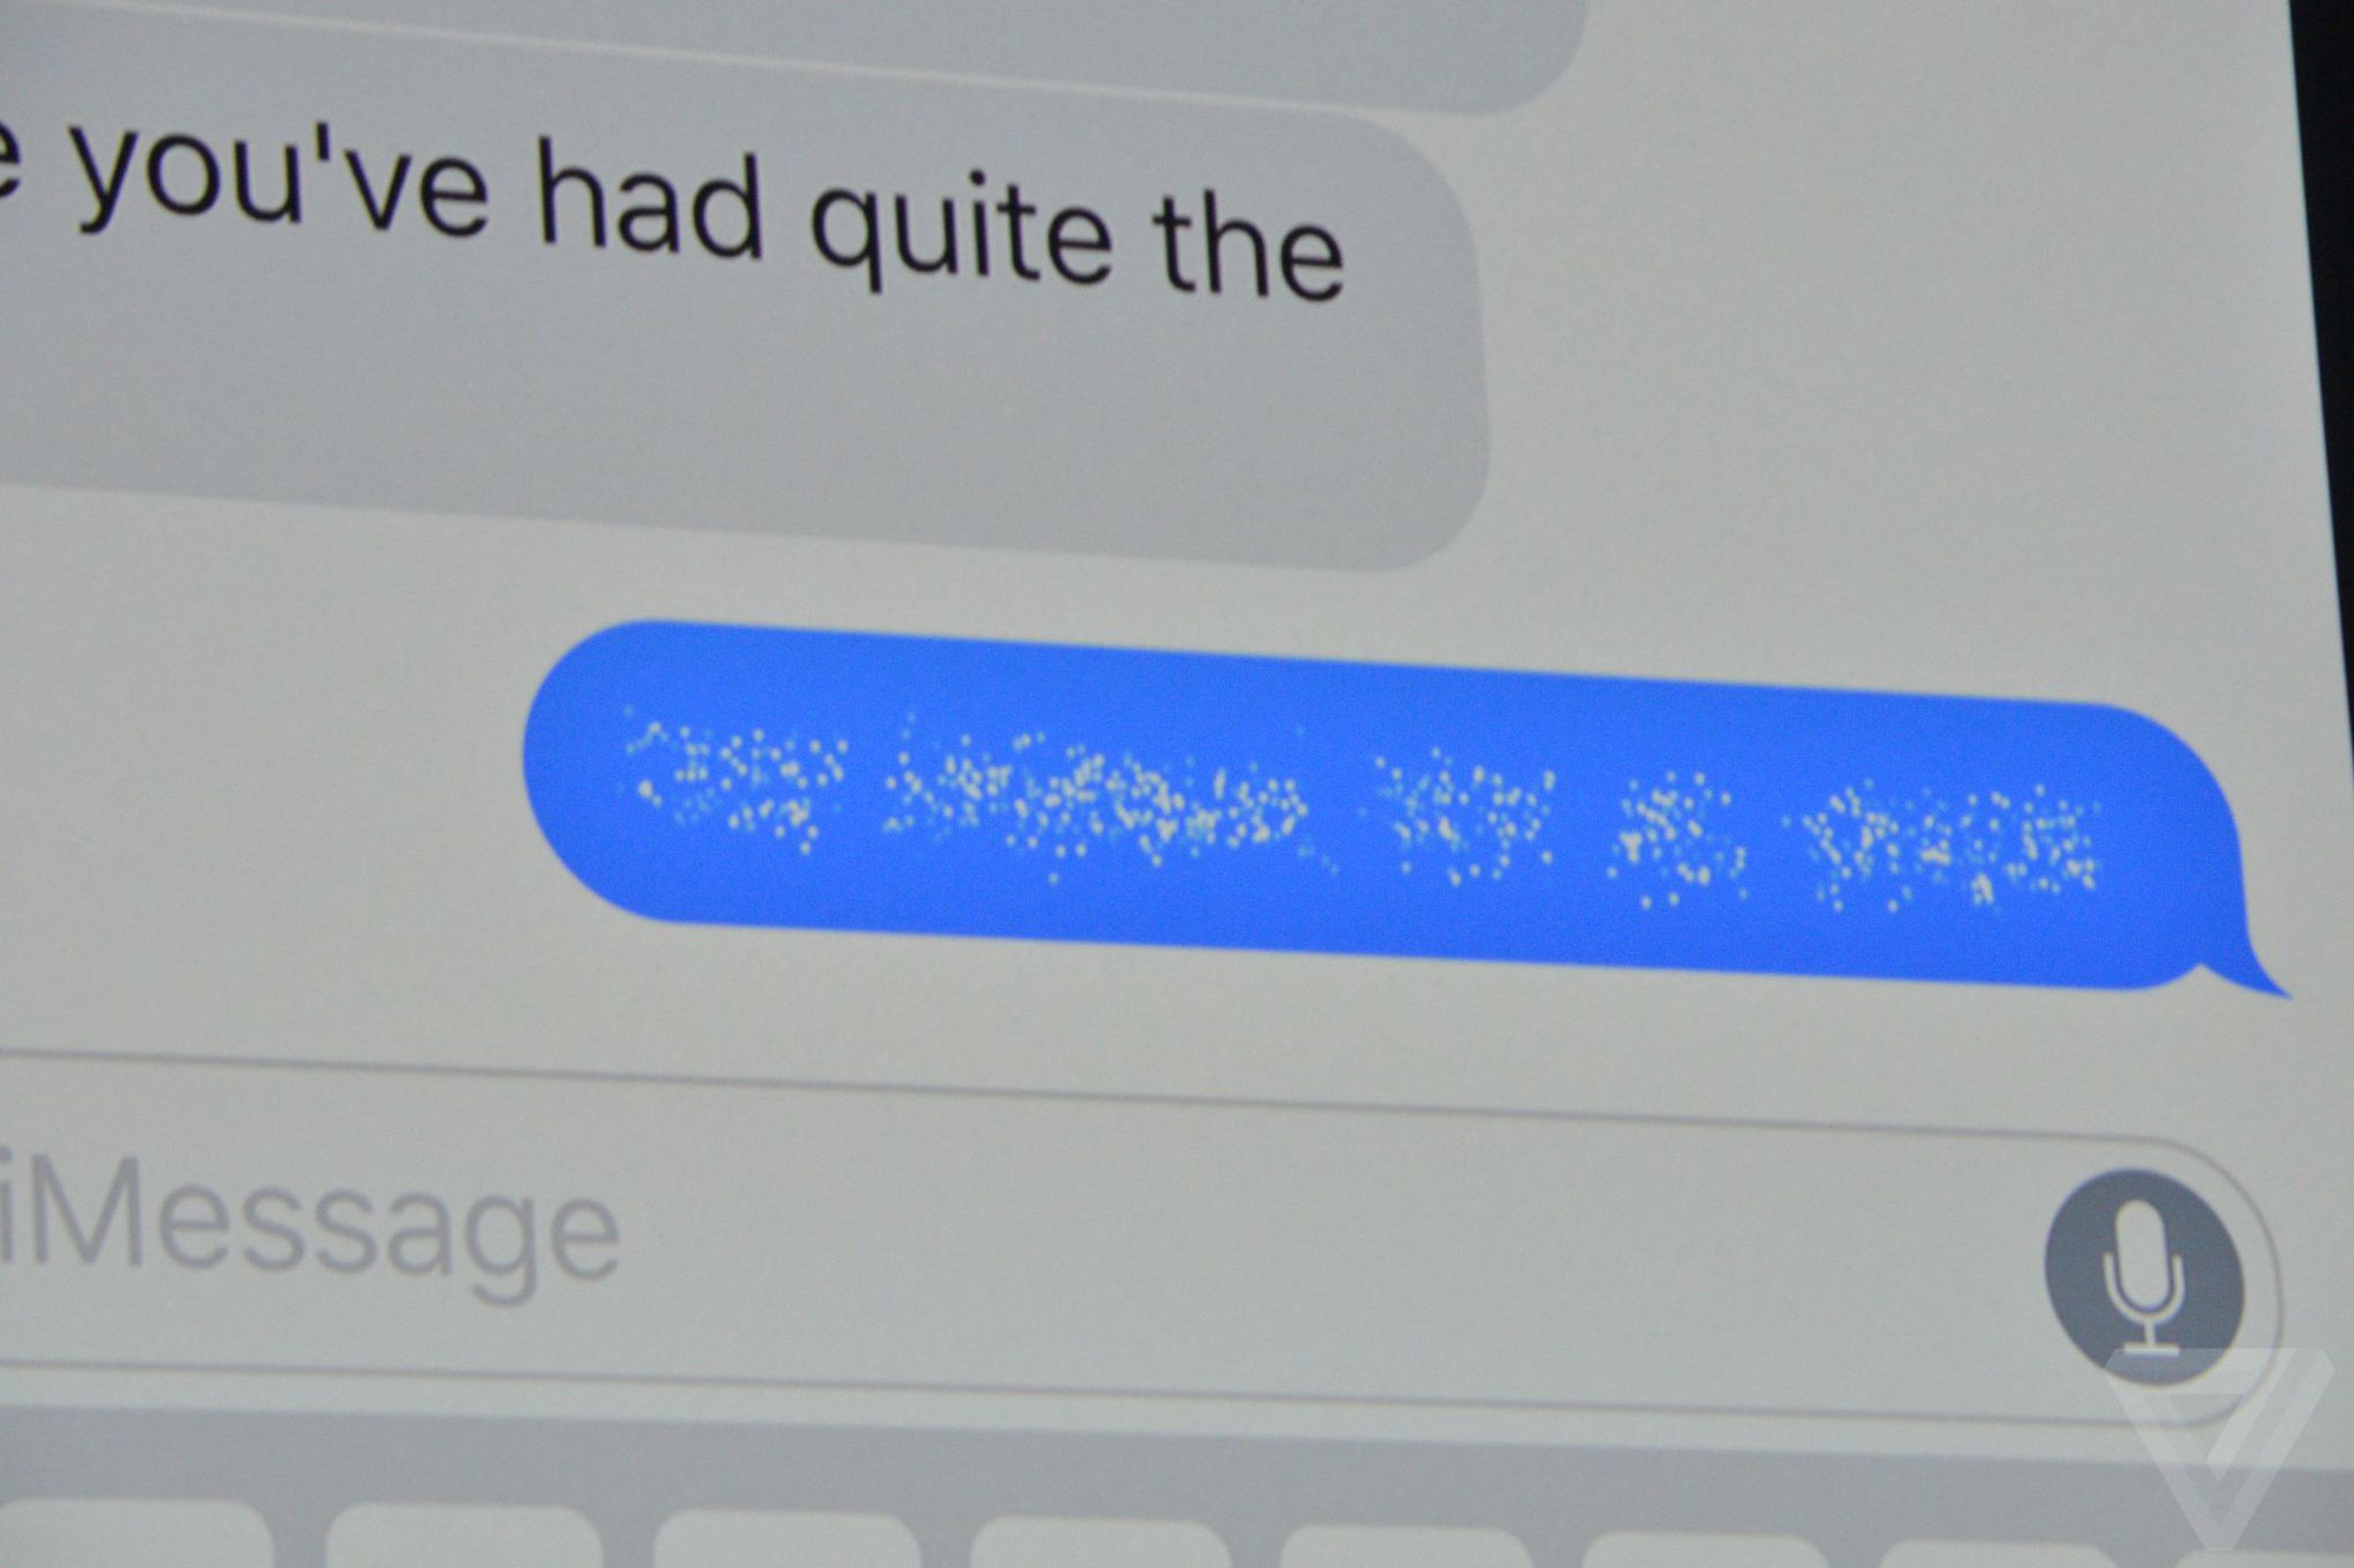 iMessage at WWDC16 announcement photos